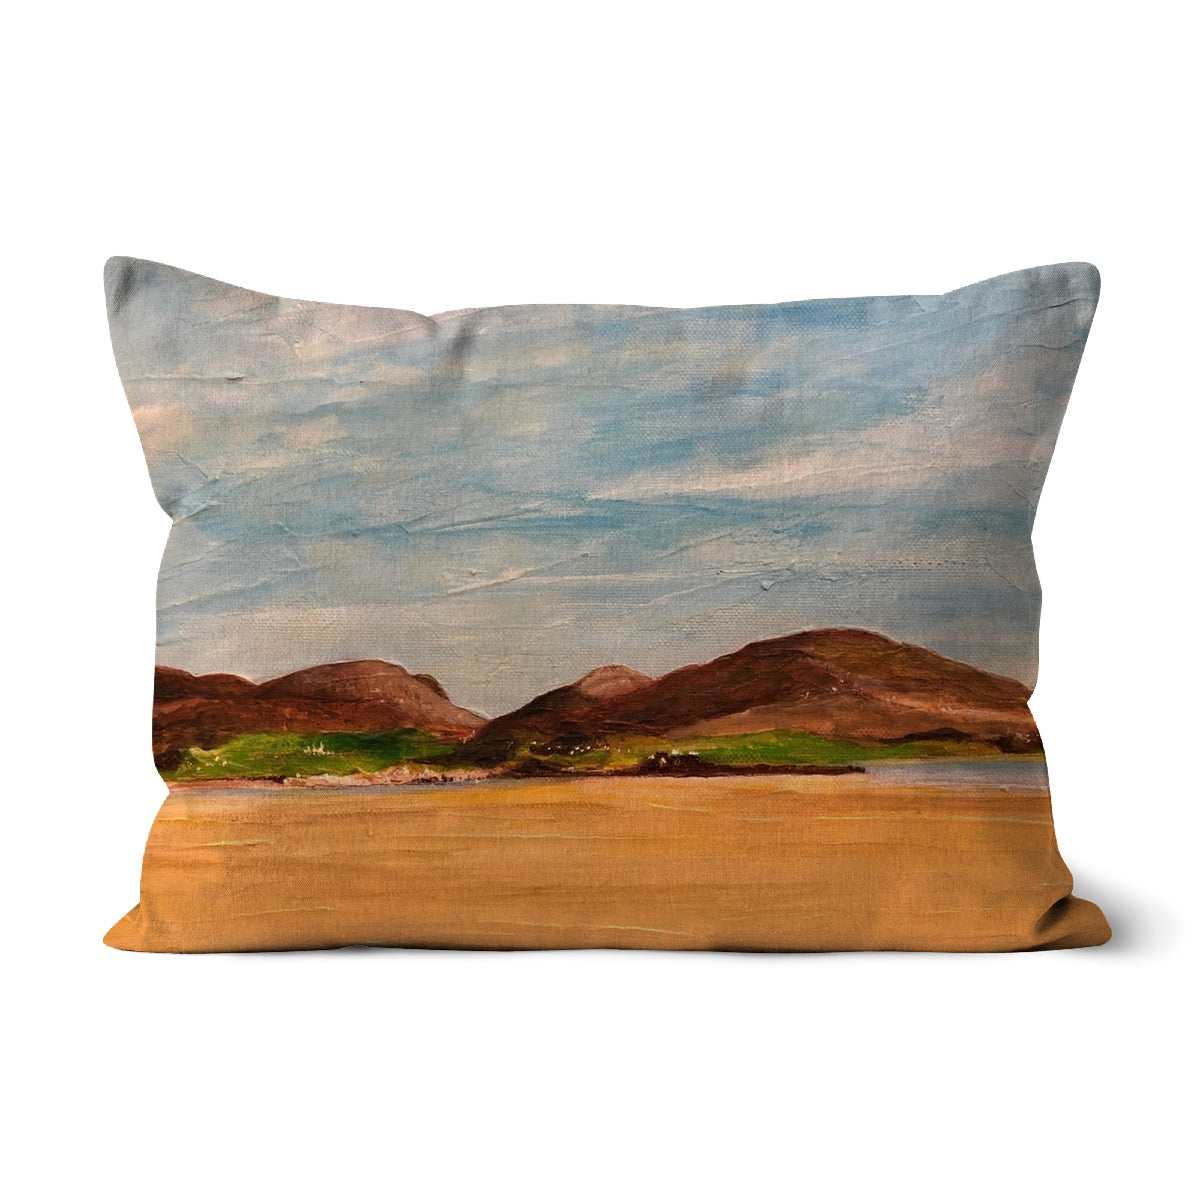 Uig Sands Lewis Art Gifts Cushion-Cushions-Hebridean Islands Art Gallery-Faux Suede-19"x13"-Paintings, Prints, Homeware, Art Gifts From Scotland By Scottish Artist Kevin Hunter